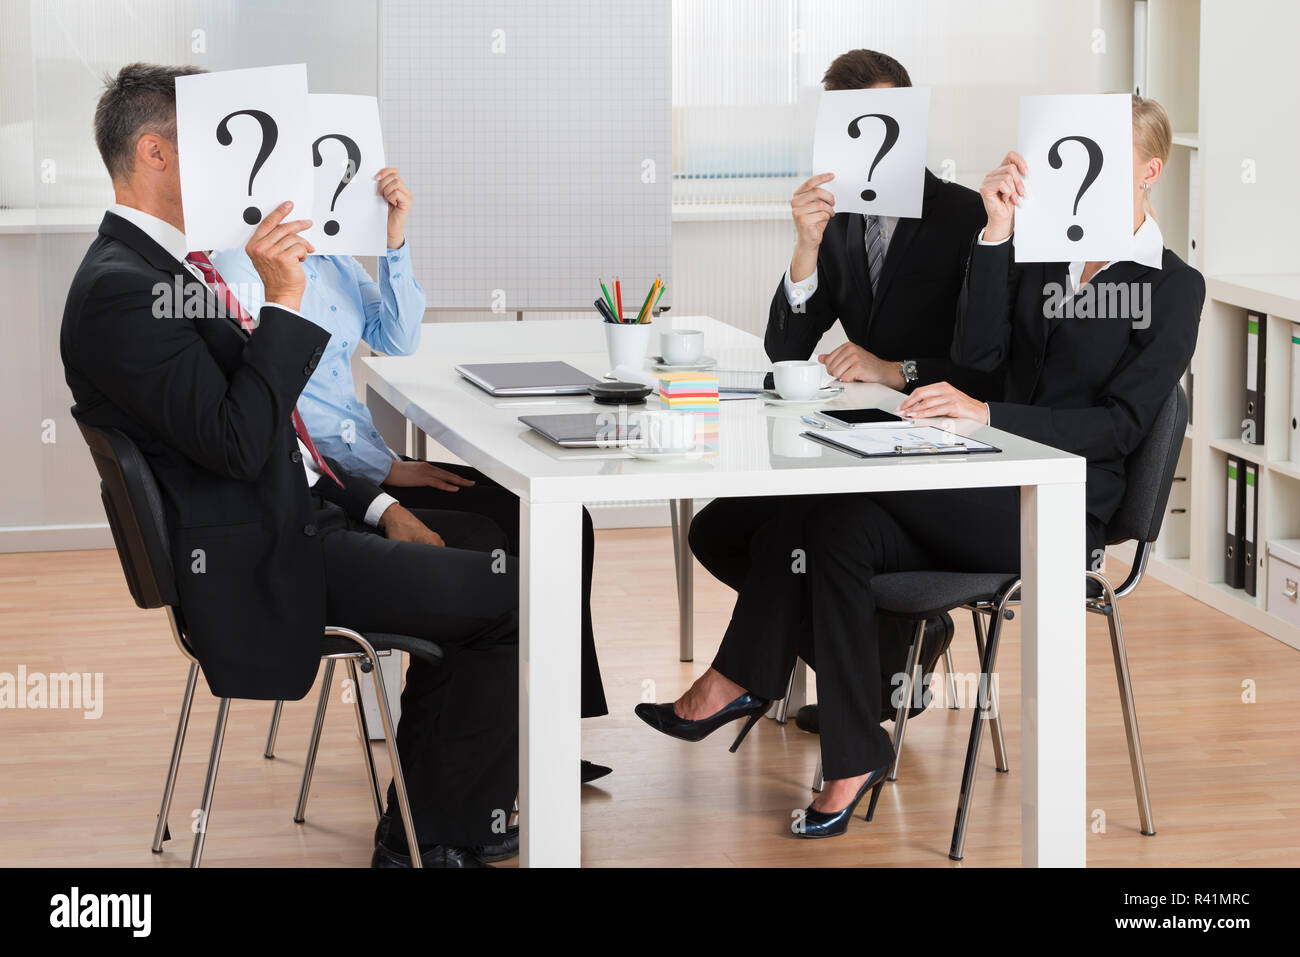 Businesspeople Hiding Faces Behind Question Mark Sign Stock Photo